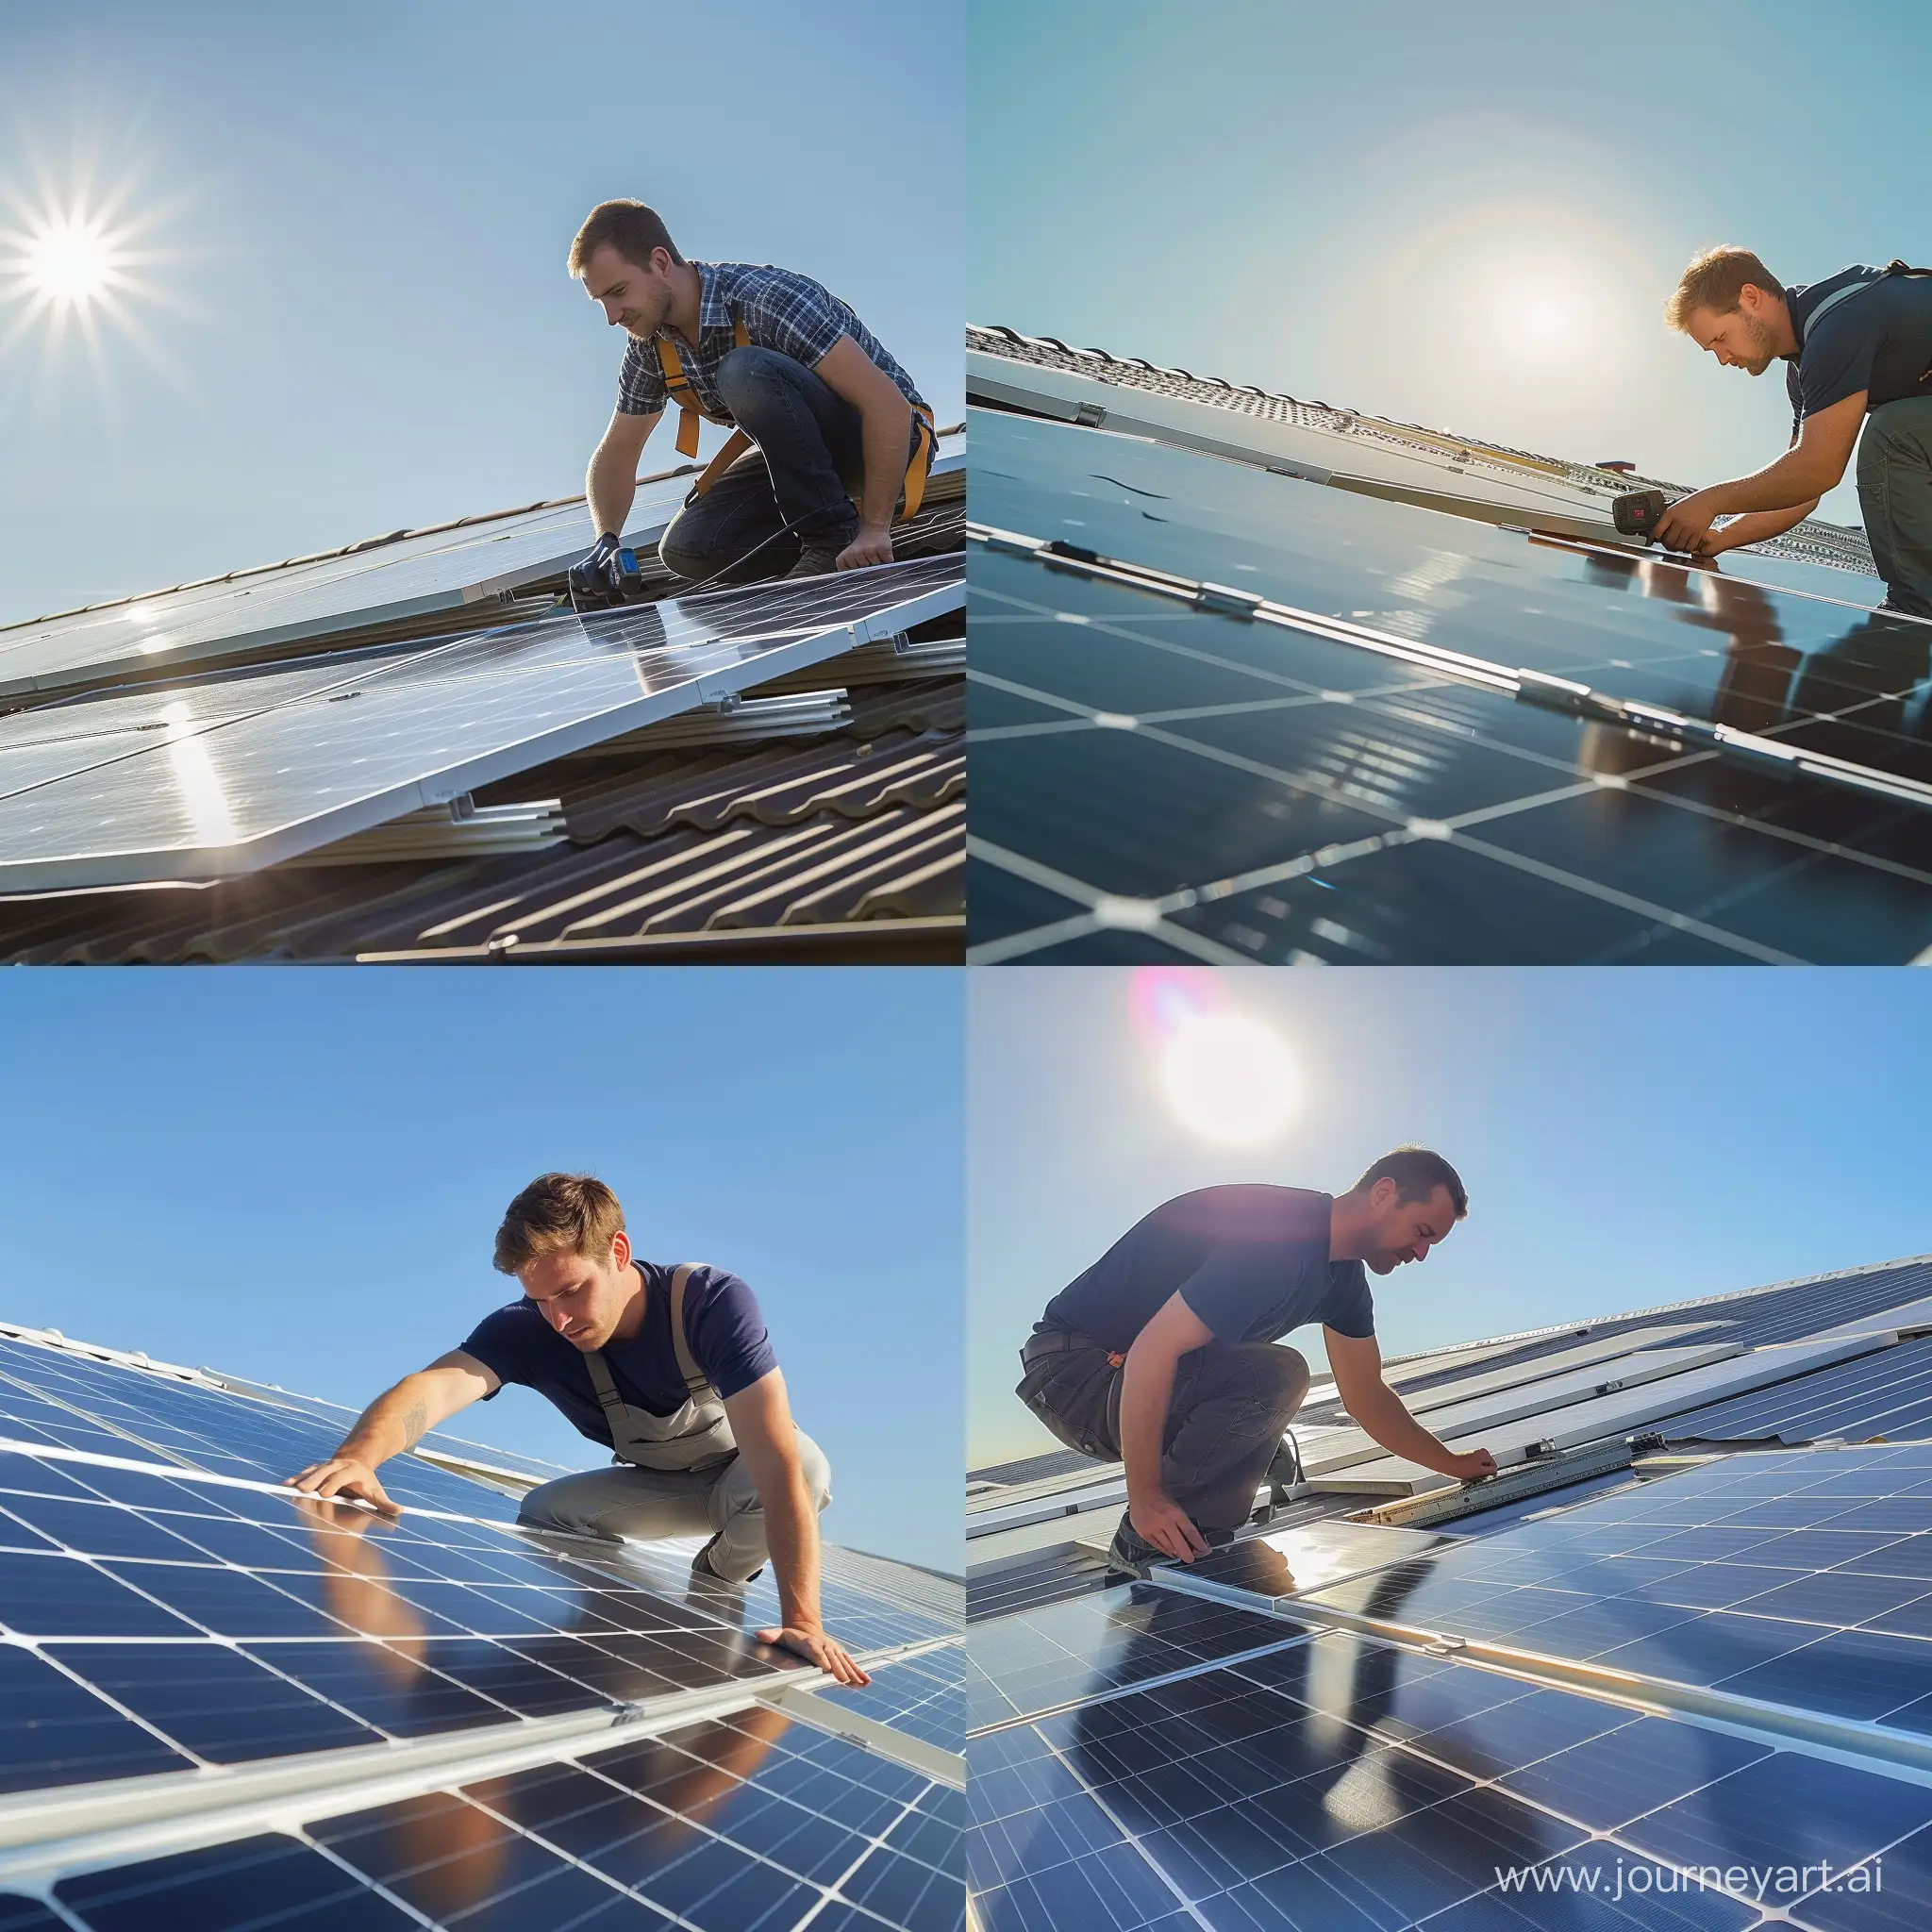 Caucasian-Man-Installing-Photovoltaic-Panel-on-Bright-Rooftop-under-Intense-Blue-Sky